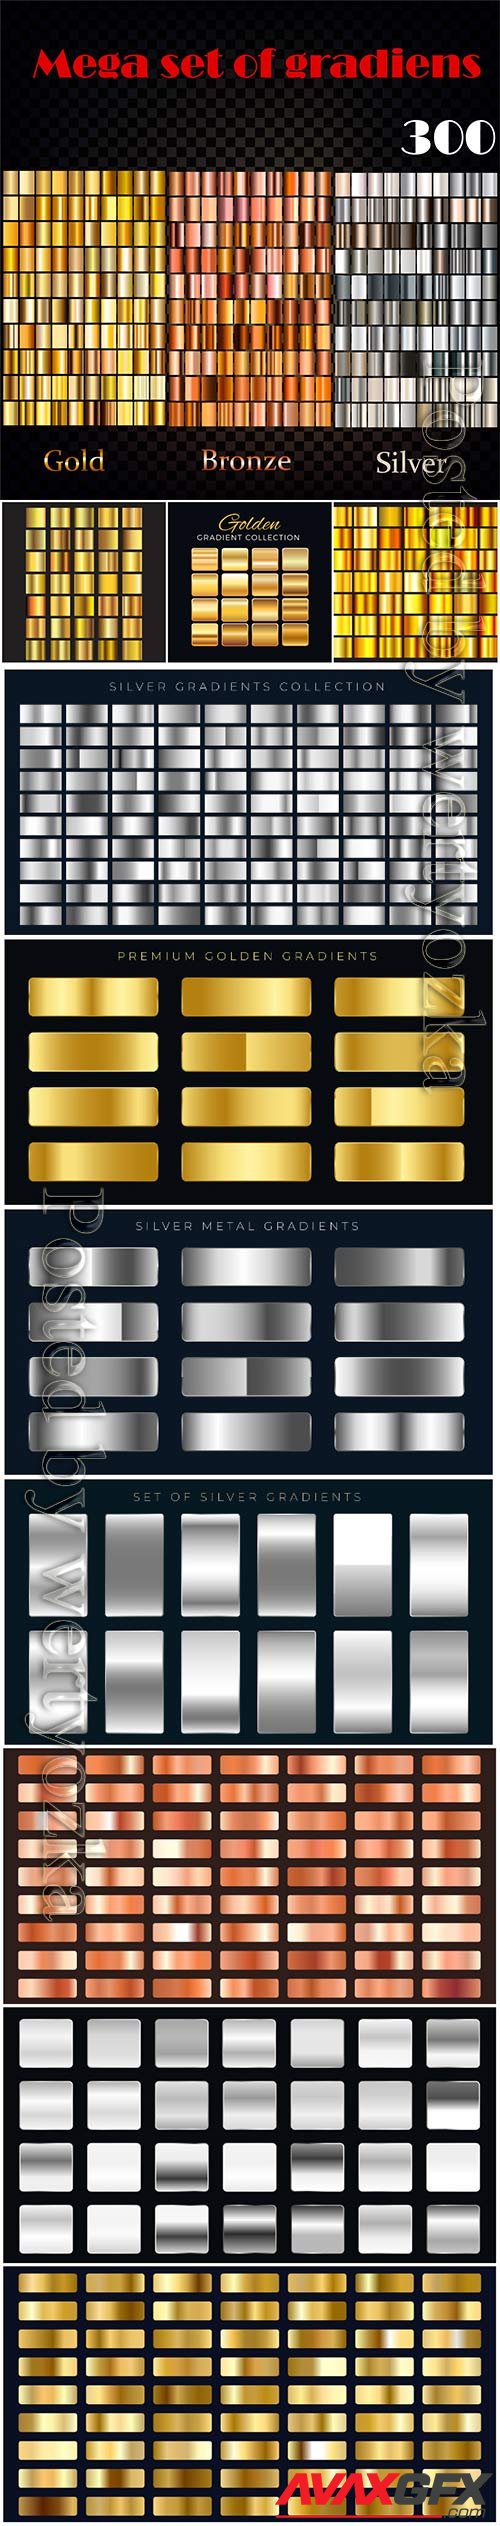 Big set of silver or gold gradients